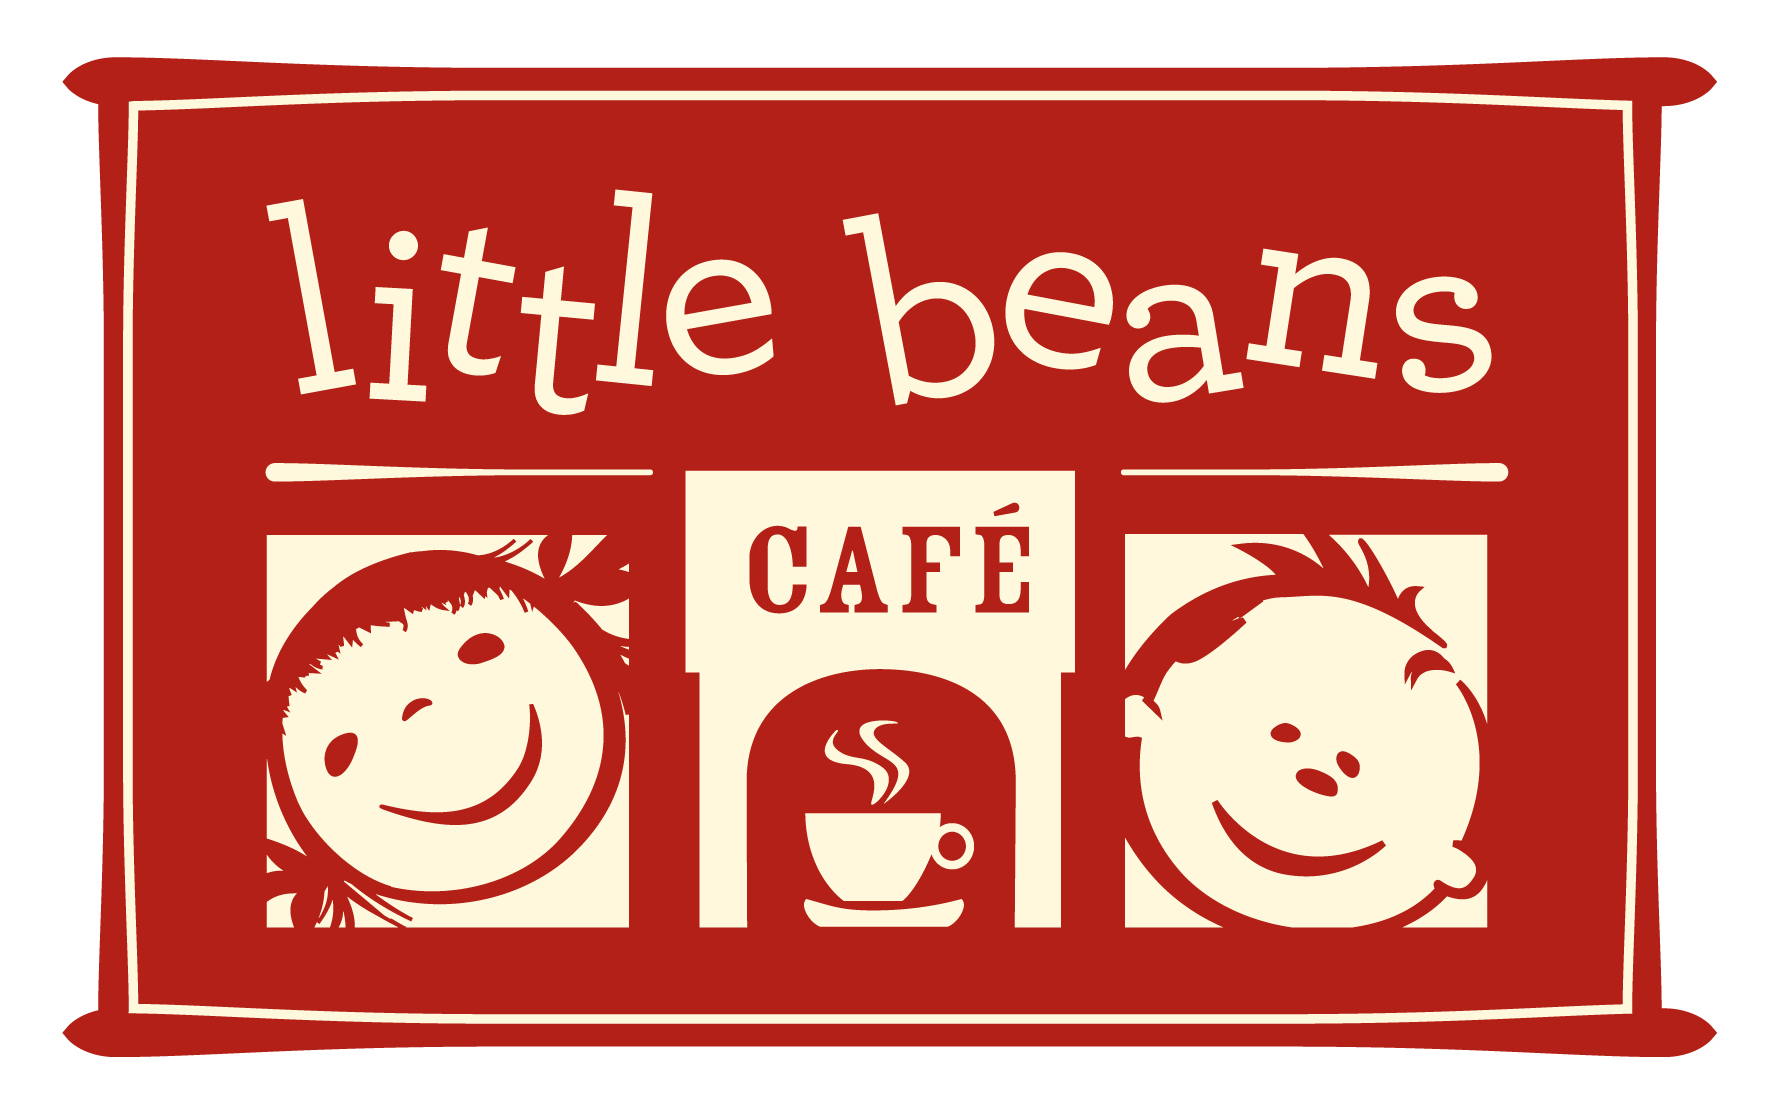 Indoor Playground & Family Cafe in Evanston | Little Beans Café